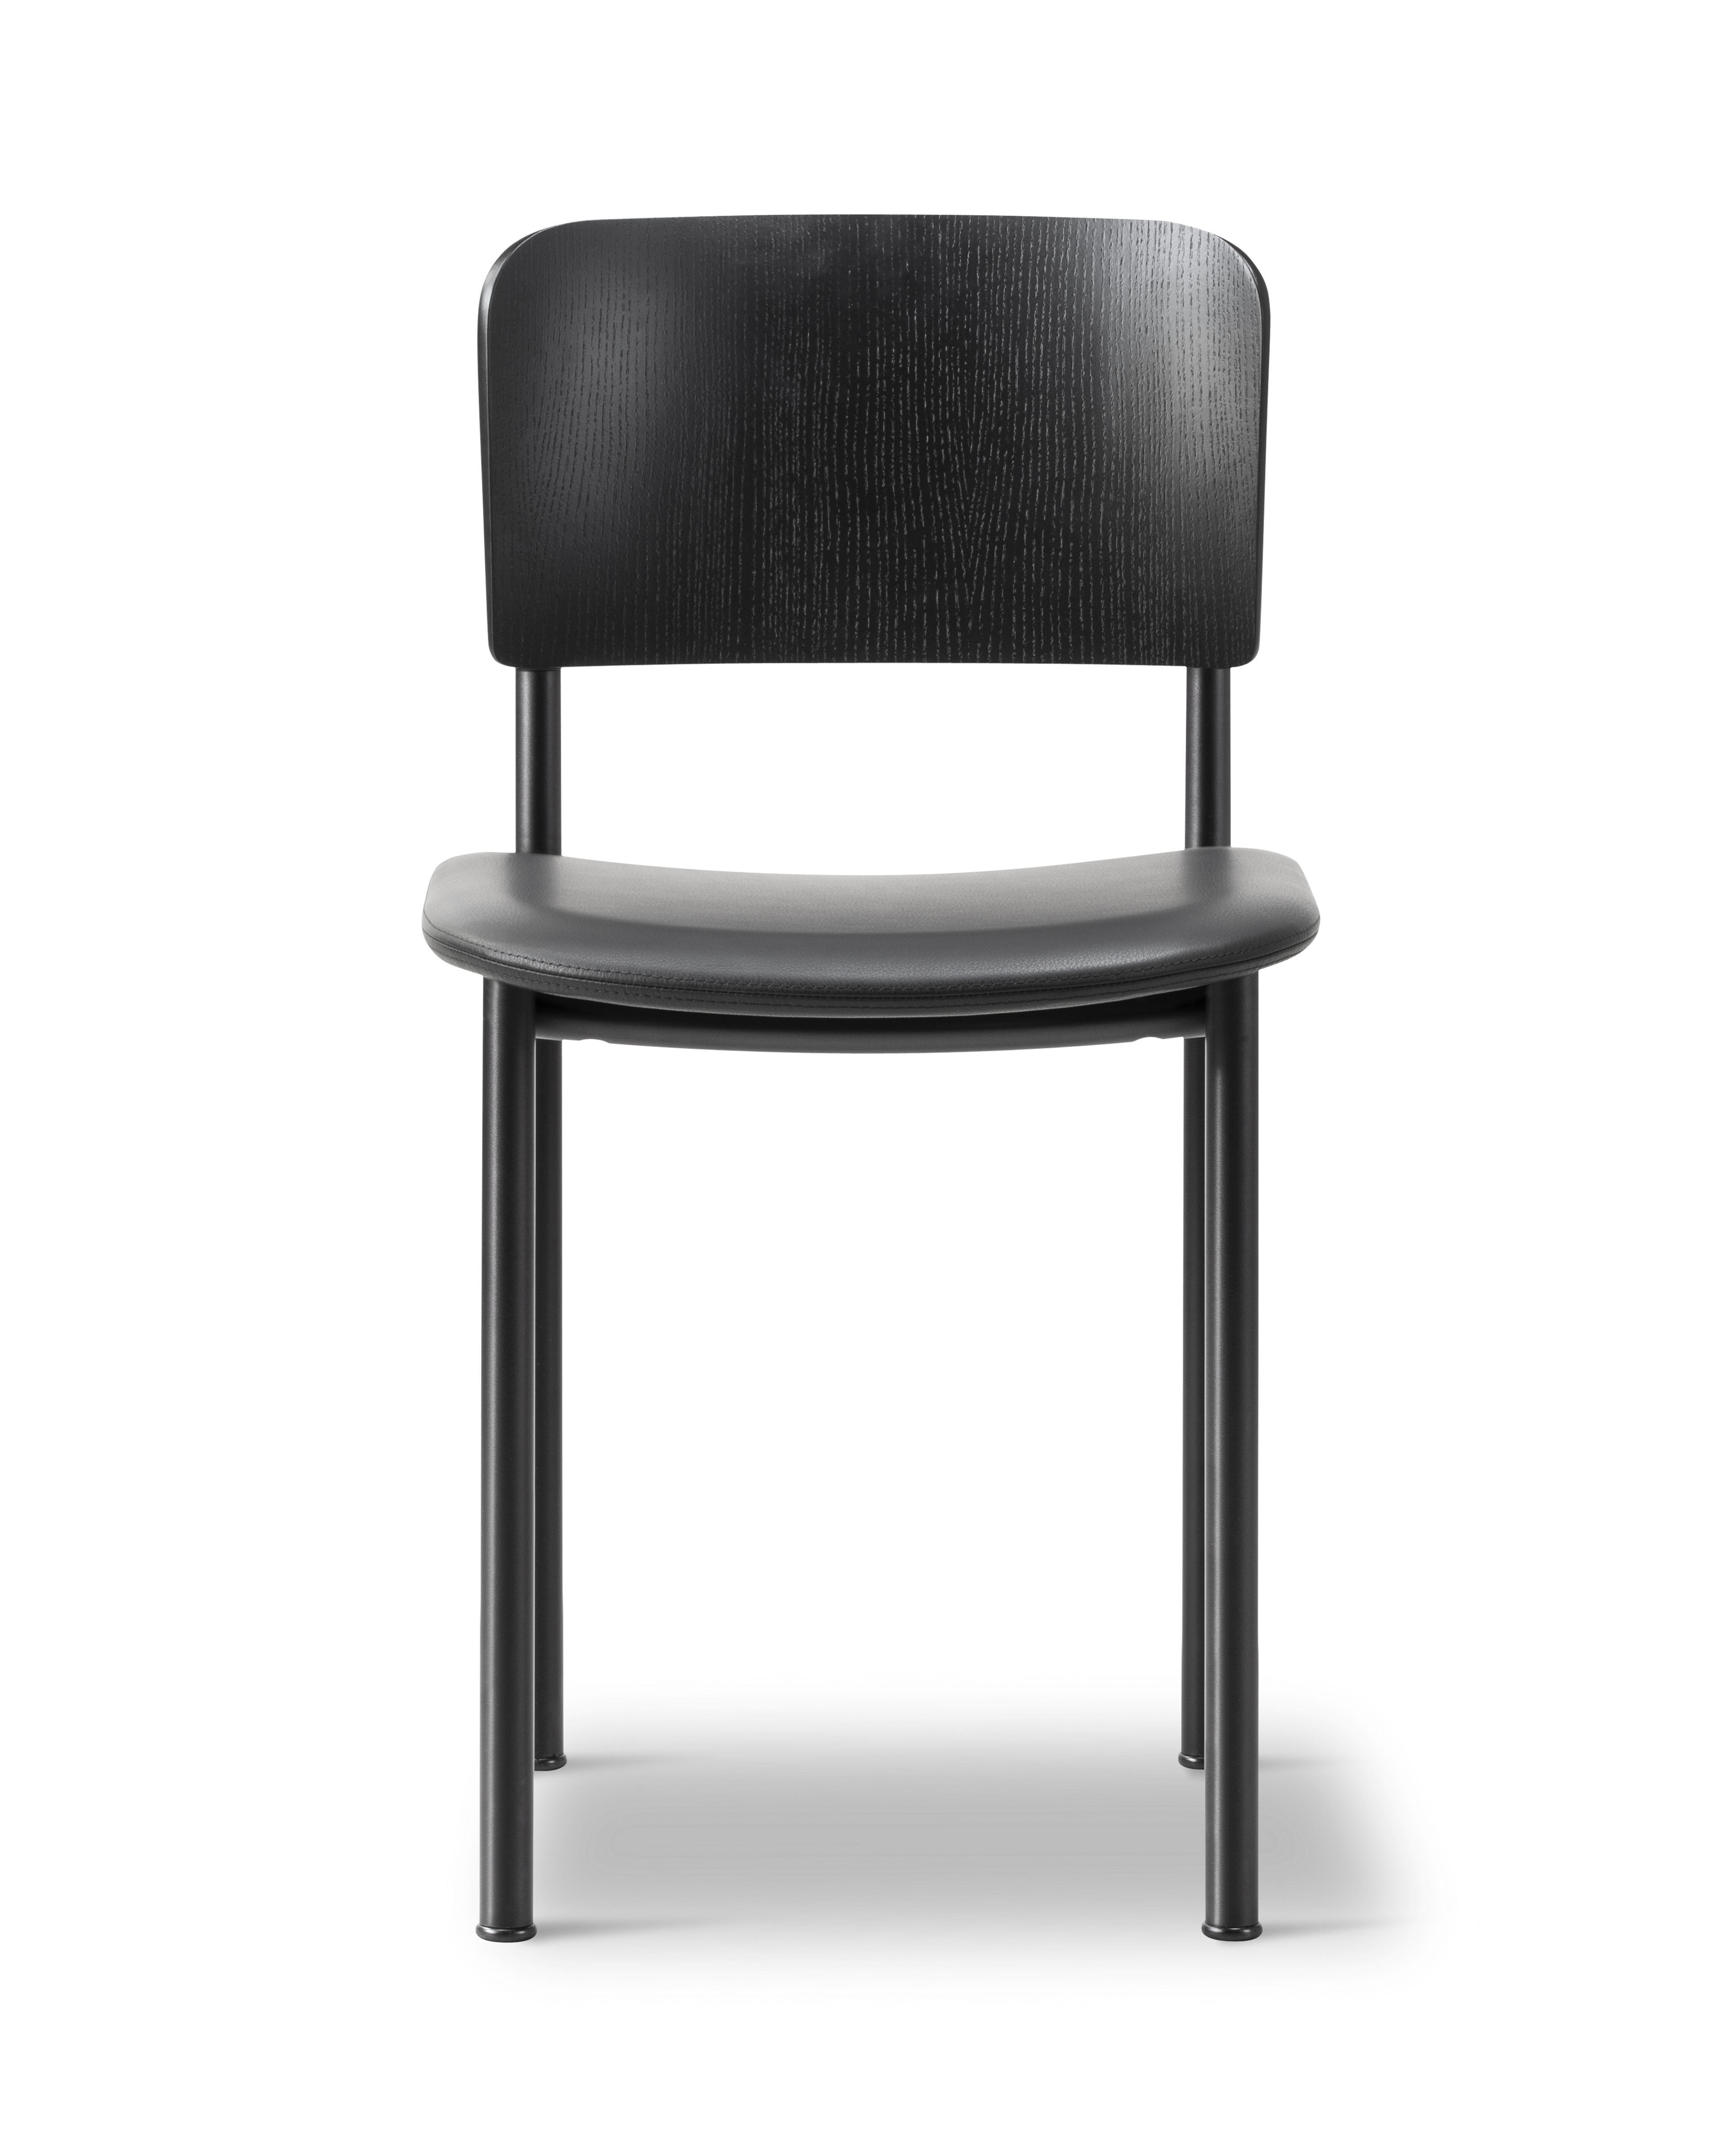 Plan Chair - Lacquered wood / Leather 301 Max / Black steel frame